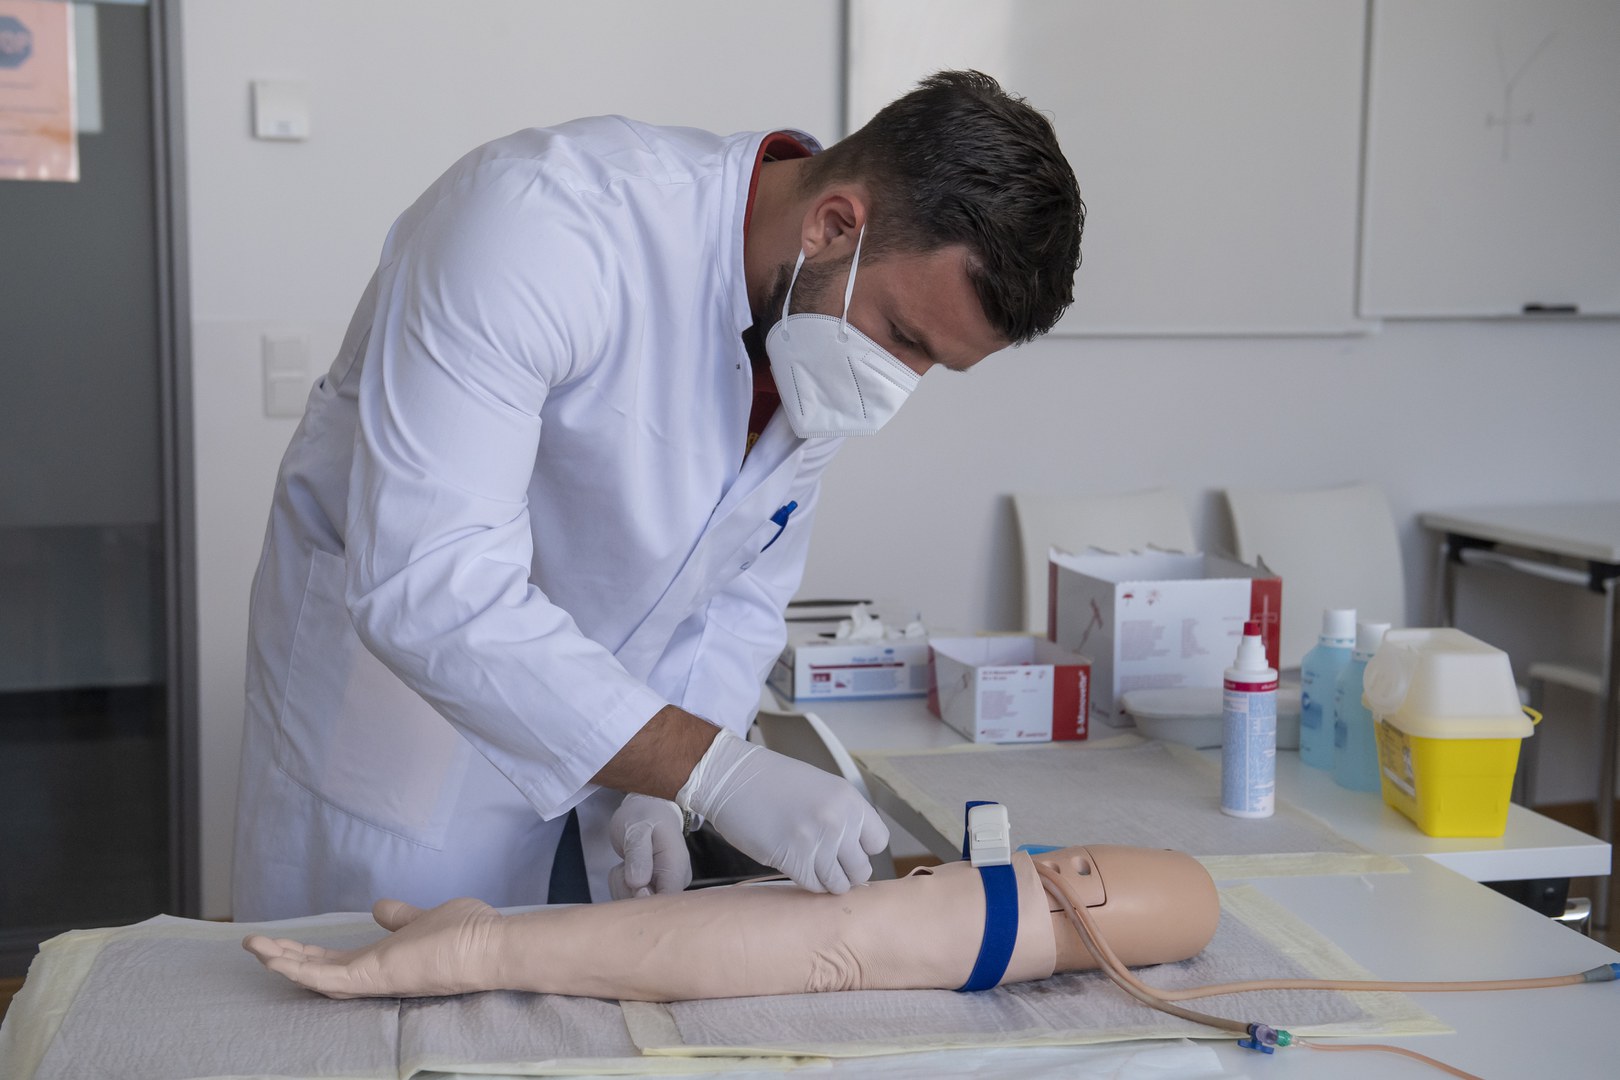 A medical student studies a patient’s arm during the exam